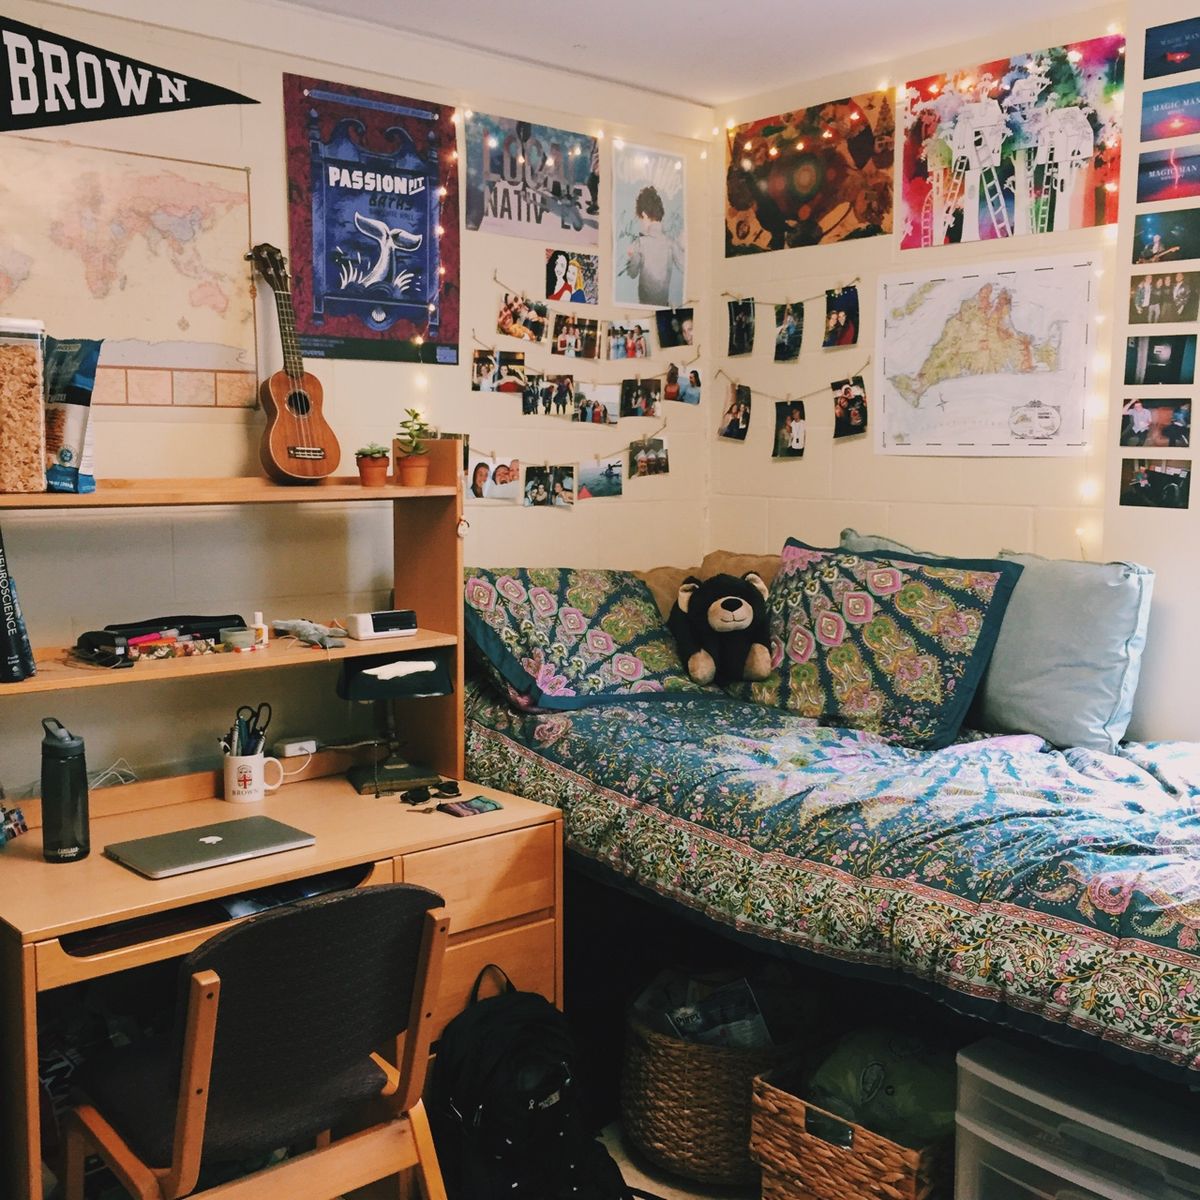 10 Things You Won't Miss About Living In A Dorm